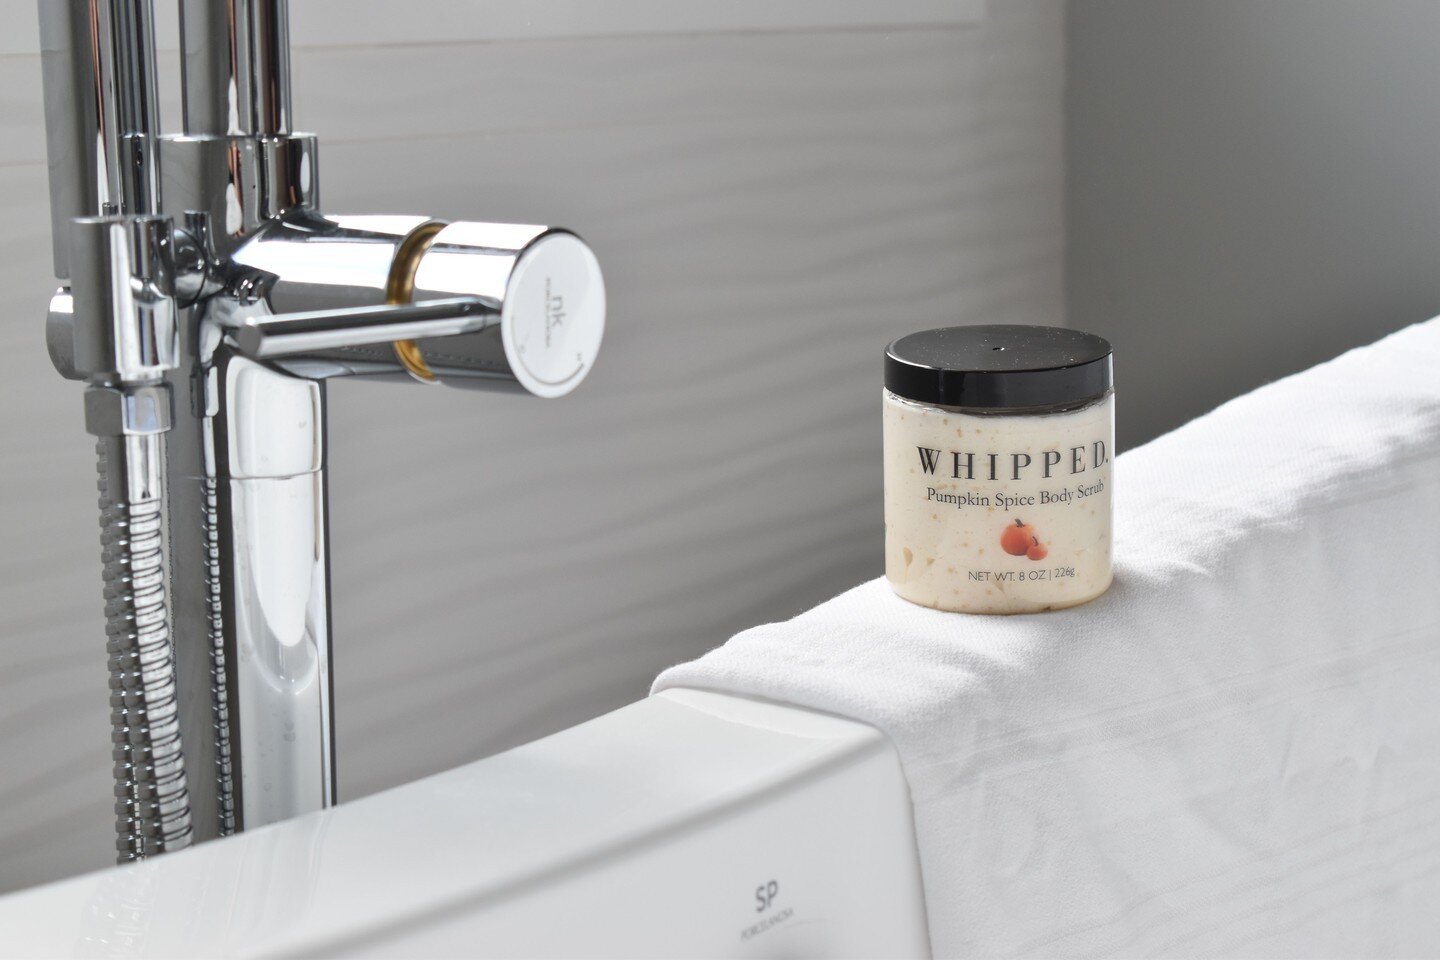 September is here, so that calls for WHIPPED. Pumpkin Spice ! 🎃  available now through November! 

&bull;
&bull;
&bull;
#shopnow #shopsmall #whippedandcompany #whippedbodyscrubs #whippedbodybutters #whipped #coffee #westhamptonbeach #gift #getwhippe